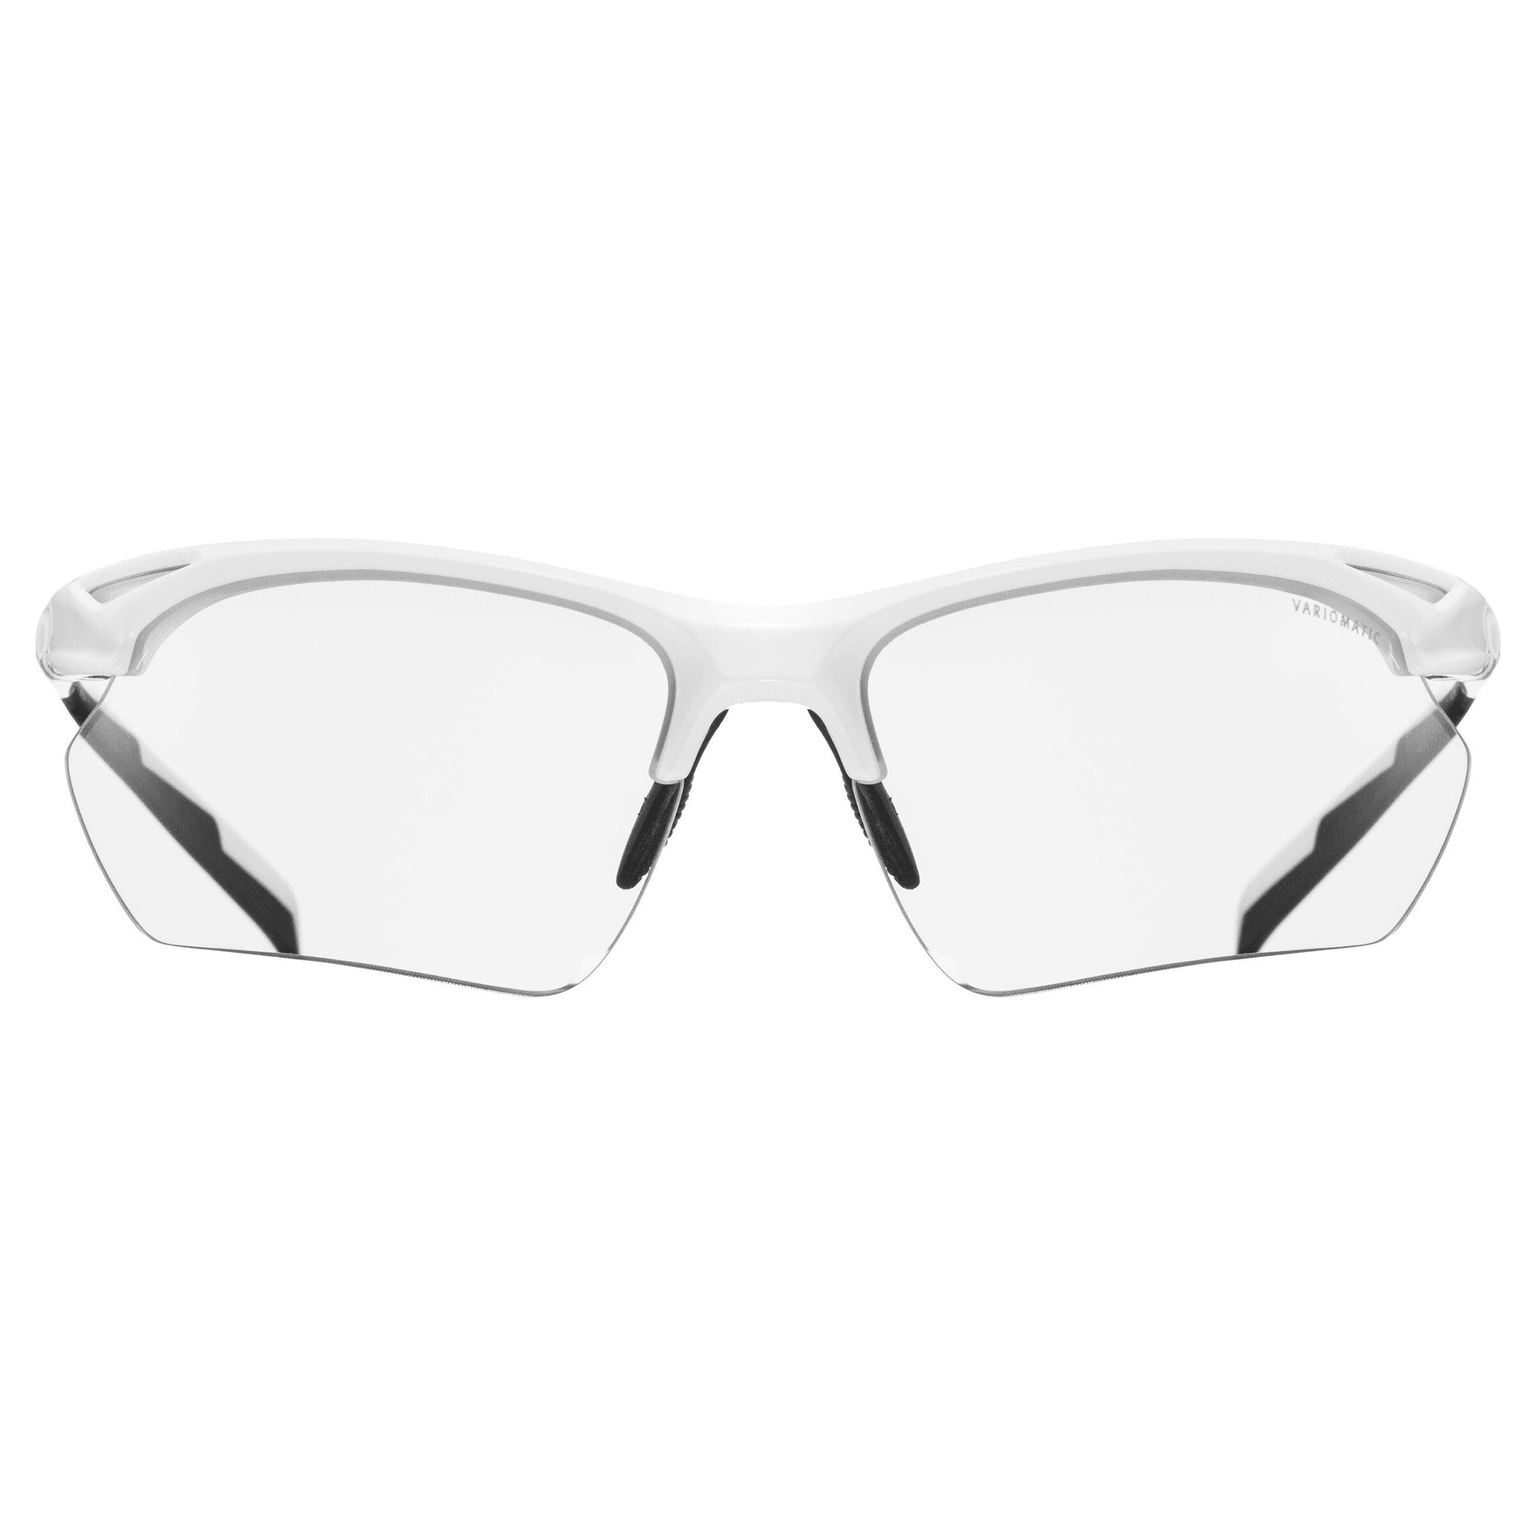 Uvex Uvex Sportstyle 802 V small Sportbrille weiss 7